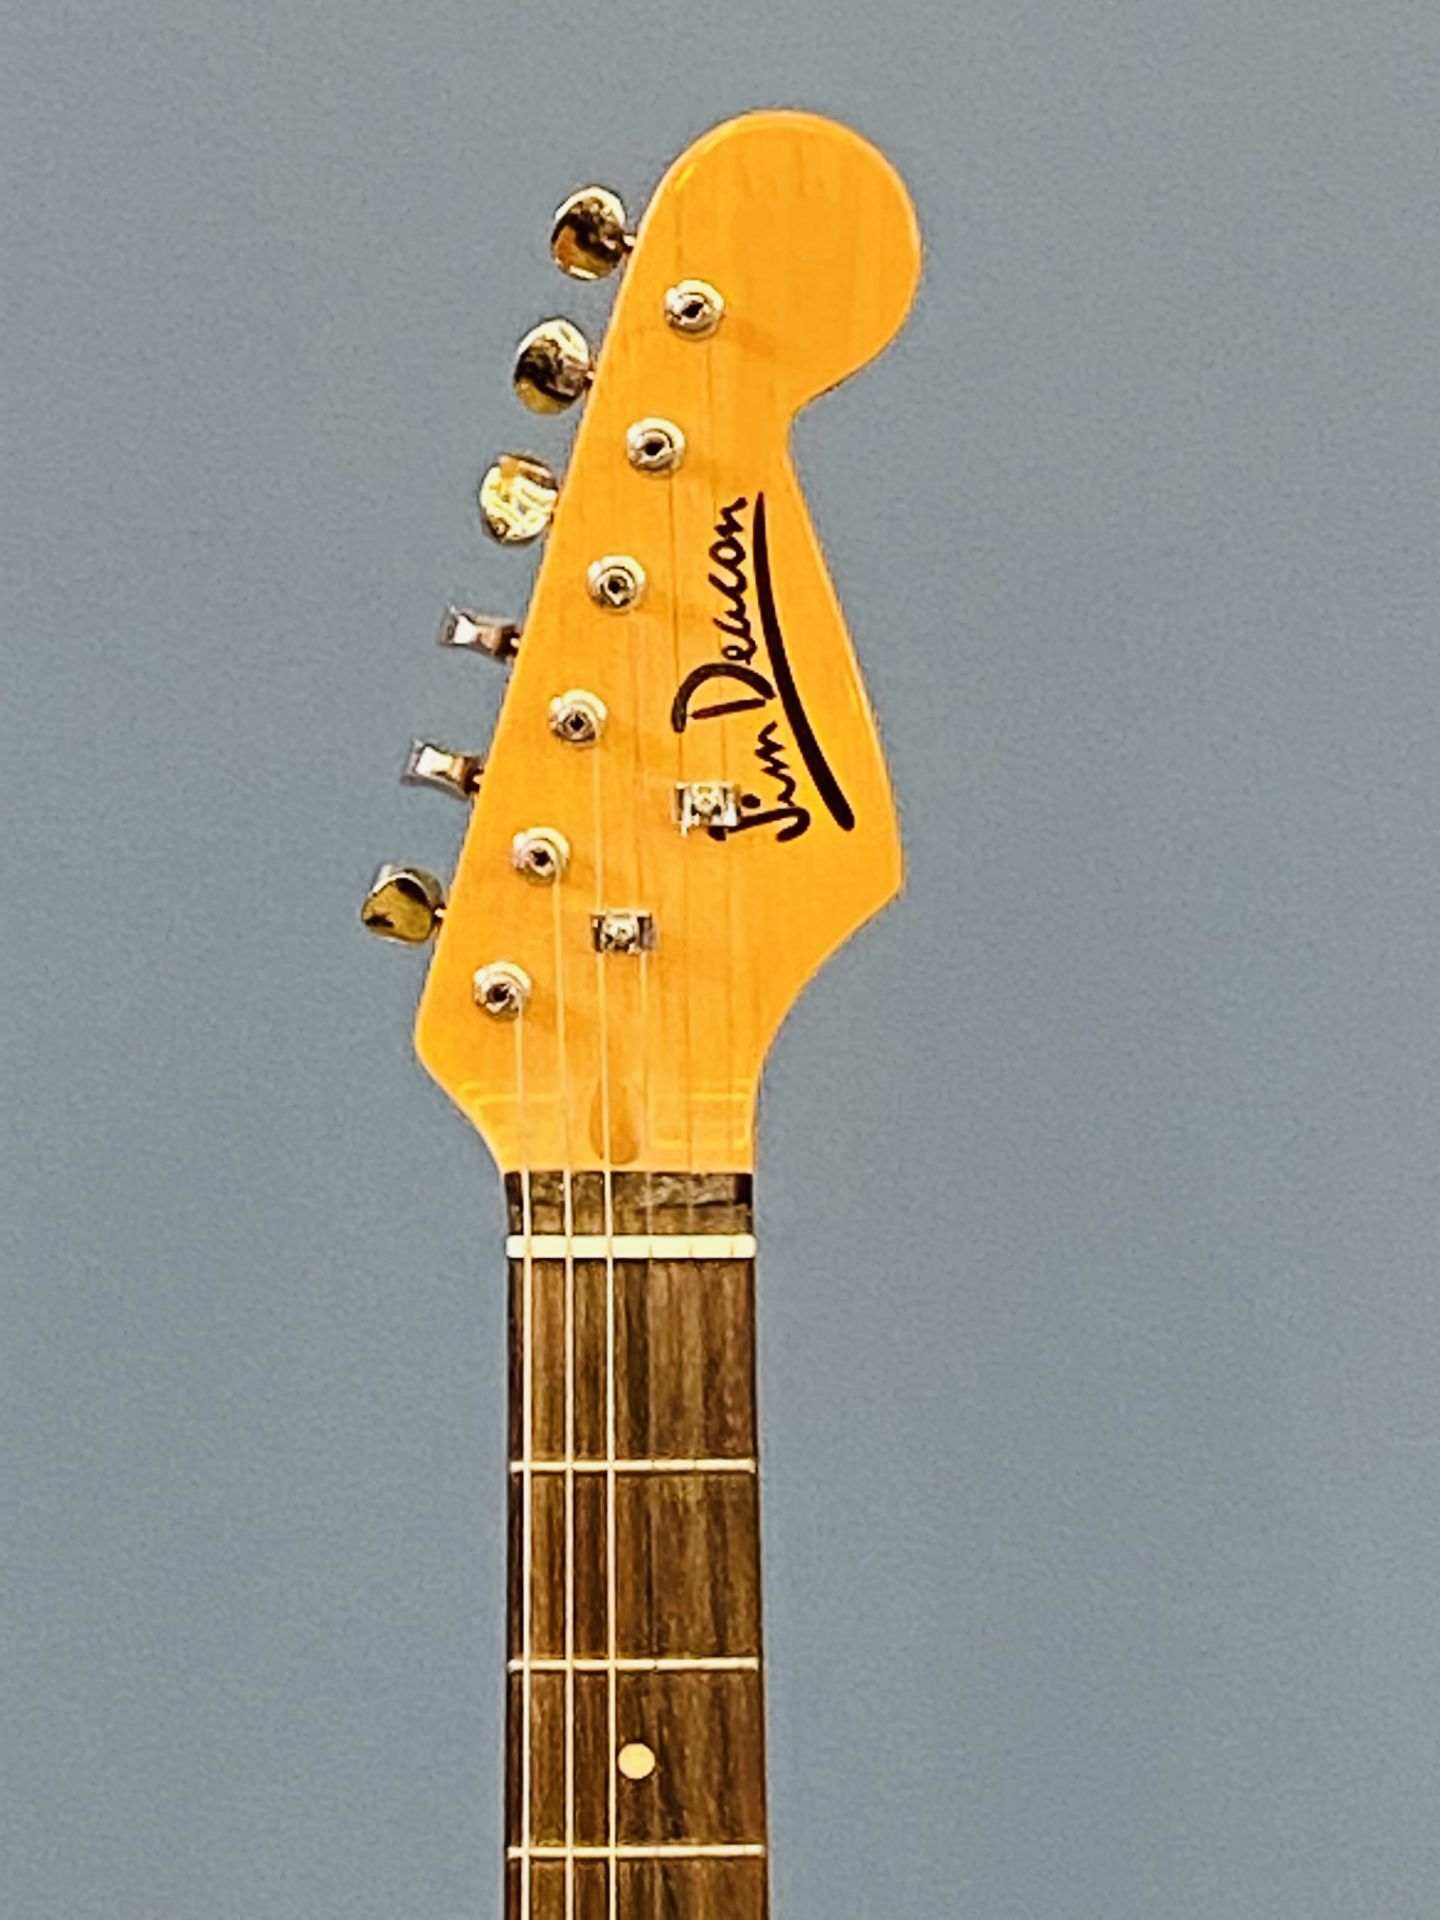 Jim Deacon Stratocaster style electric guitar - Image 2 of 4